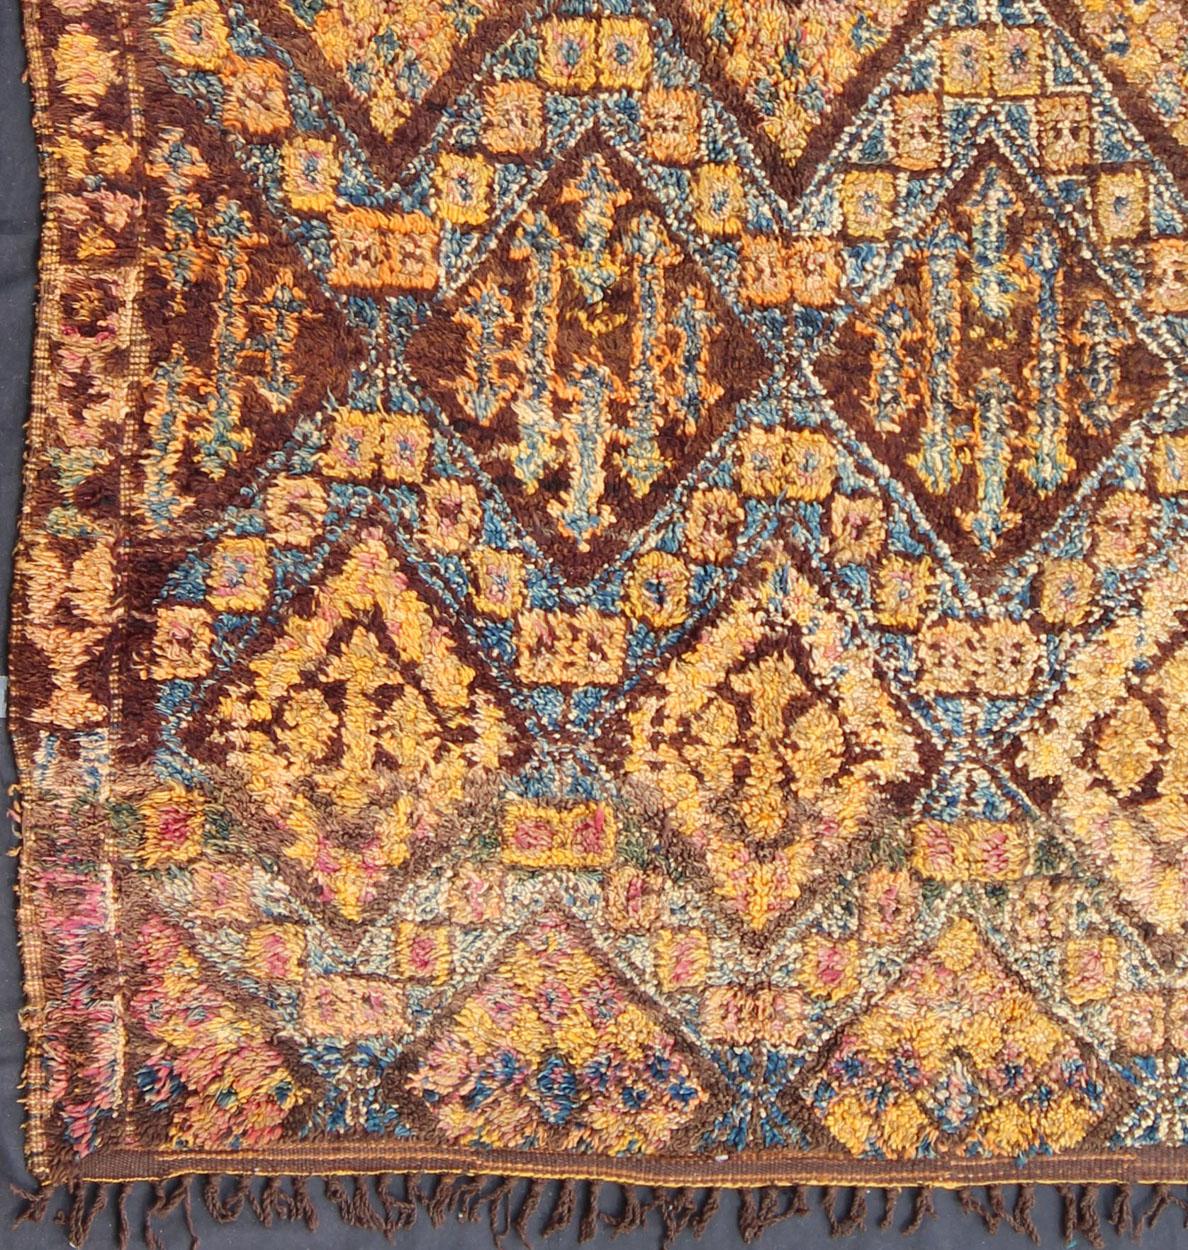 Tribal Vintage Square Moroccan Beni Ouarain In Earthy Tones With Pops of Blue and Gold For Sale